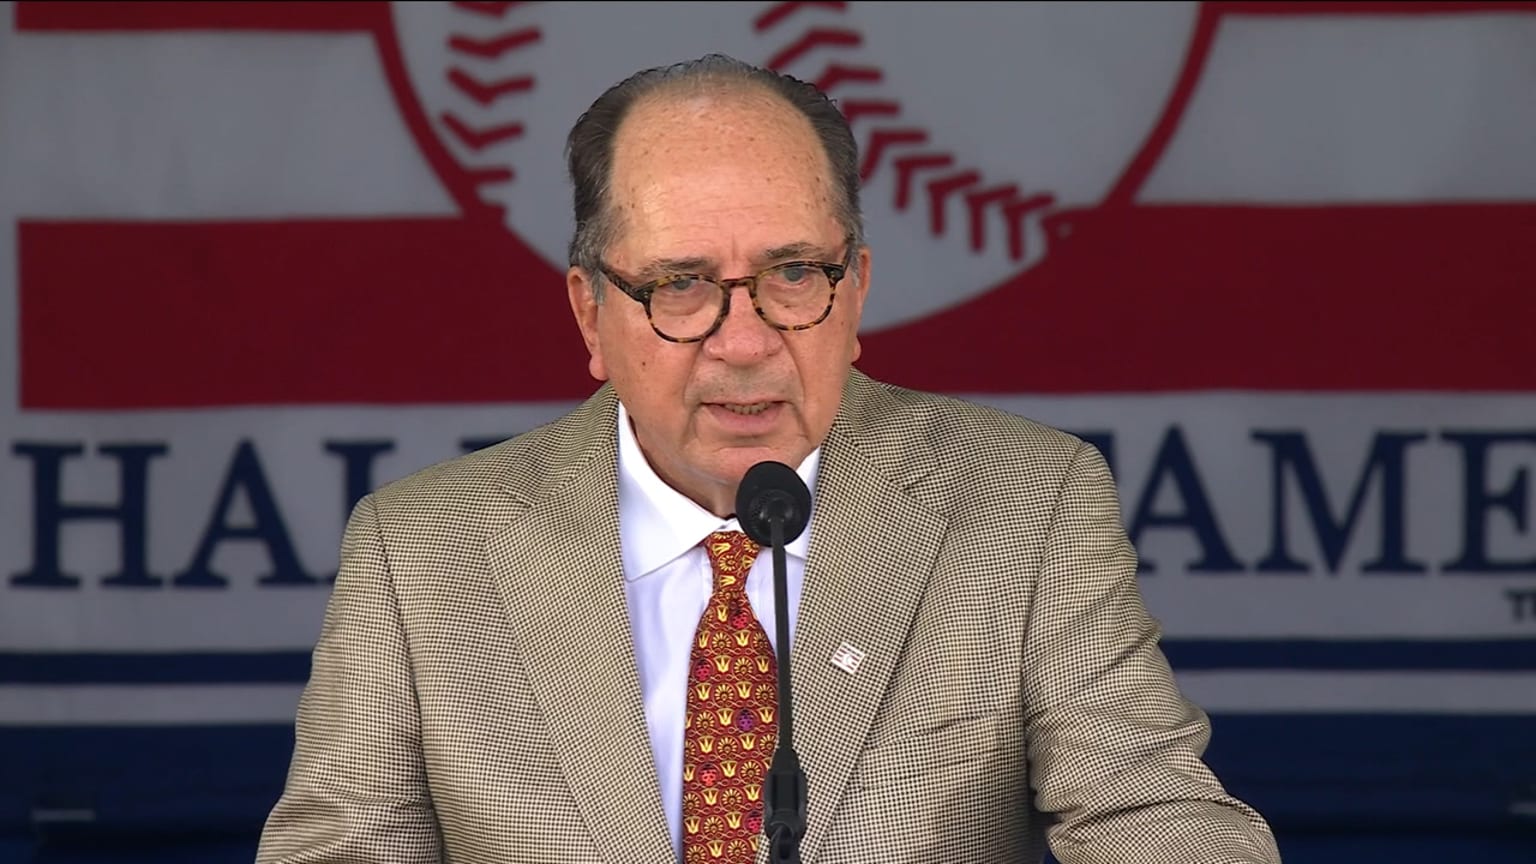 Johnny Bench delivers Hall of Fame induction speech 